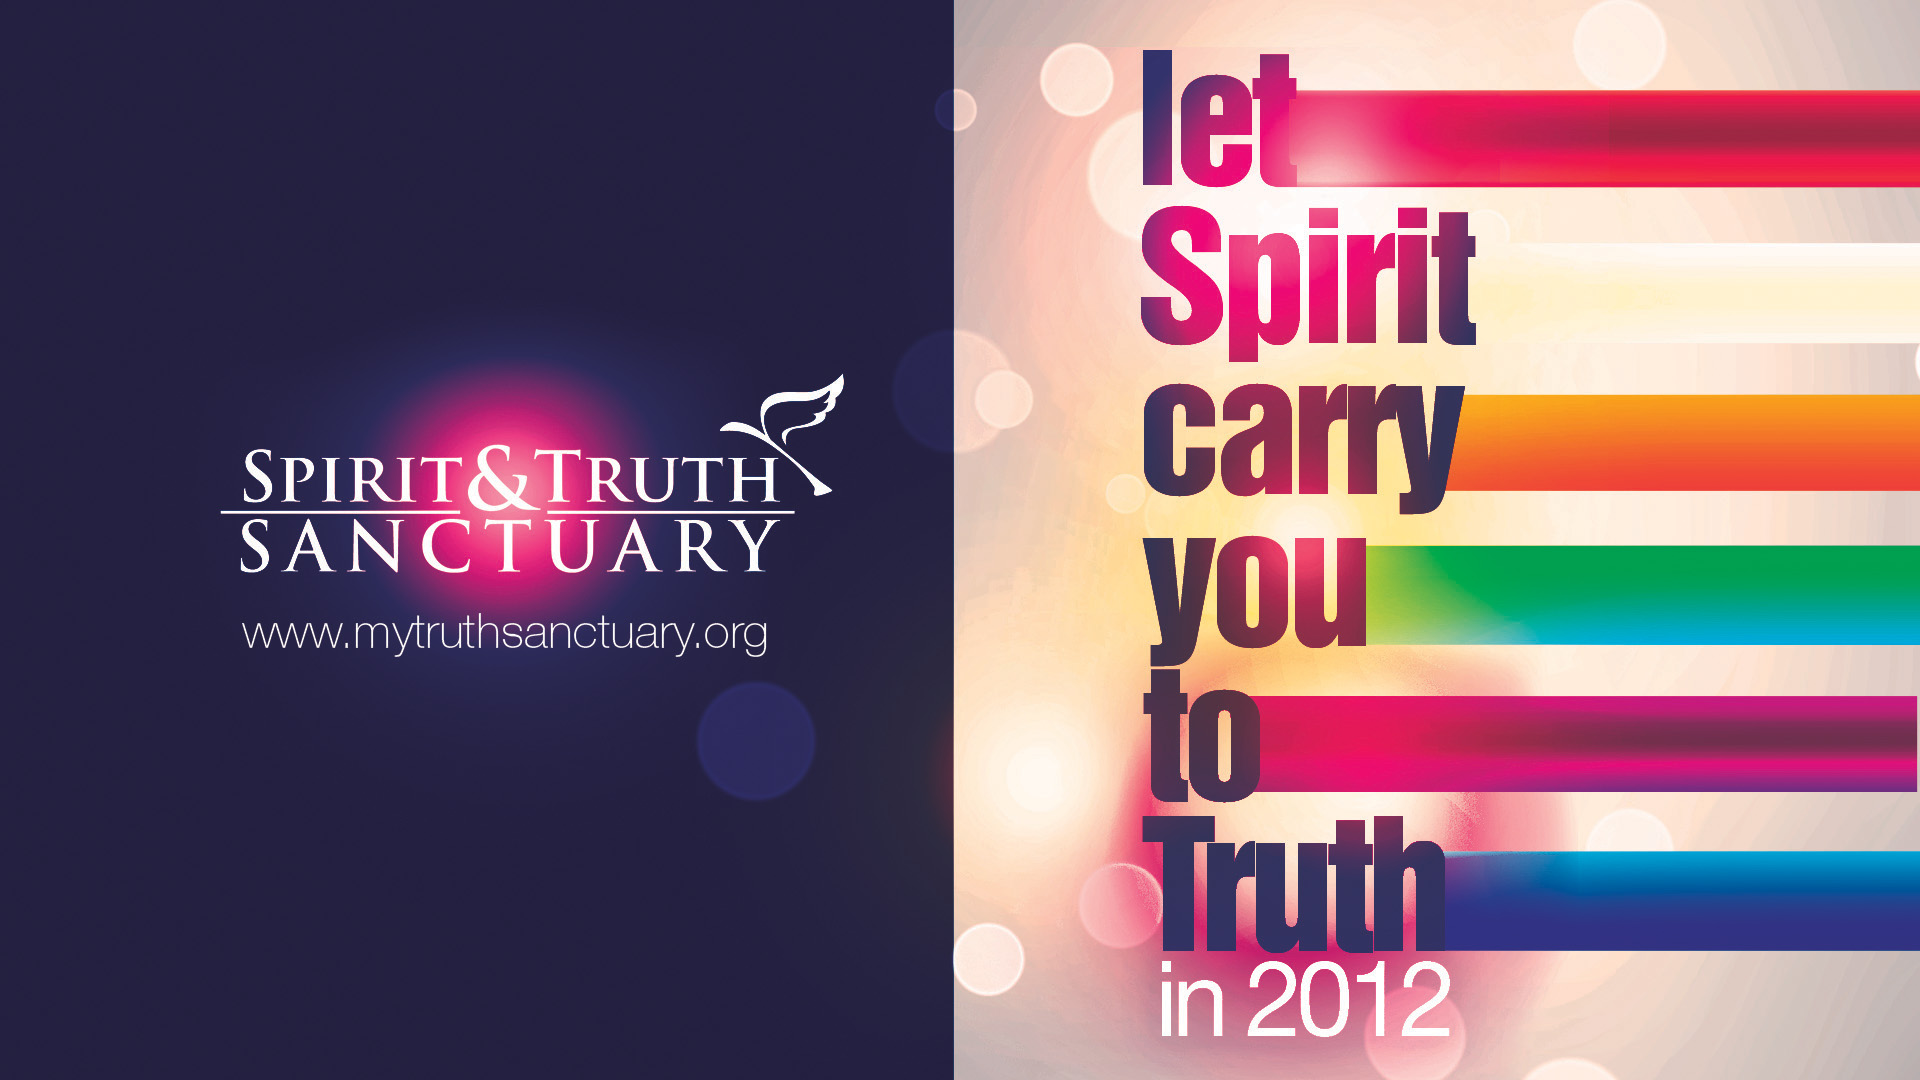 2012 Slogan "Let Spirit Carry You To Truth in 2012"